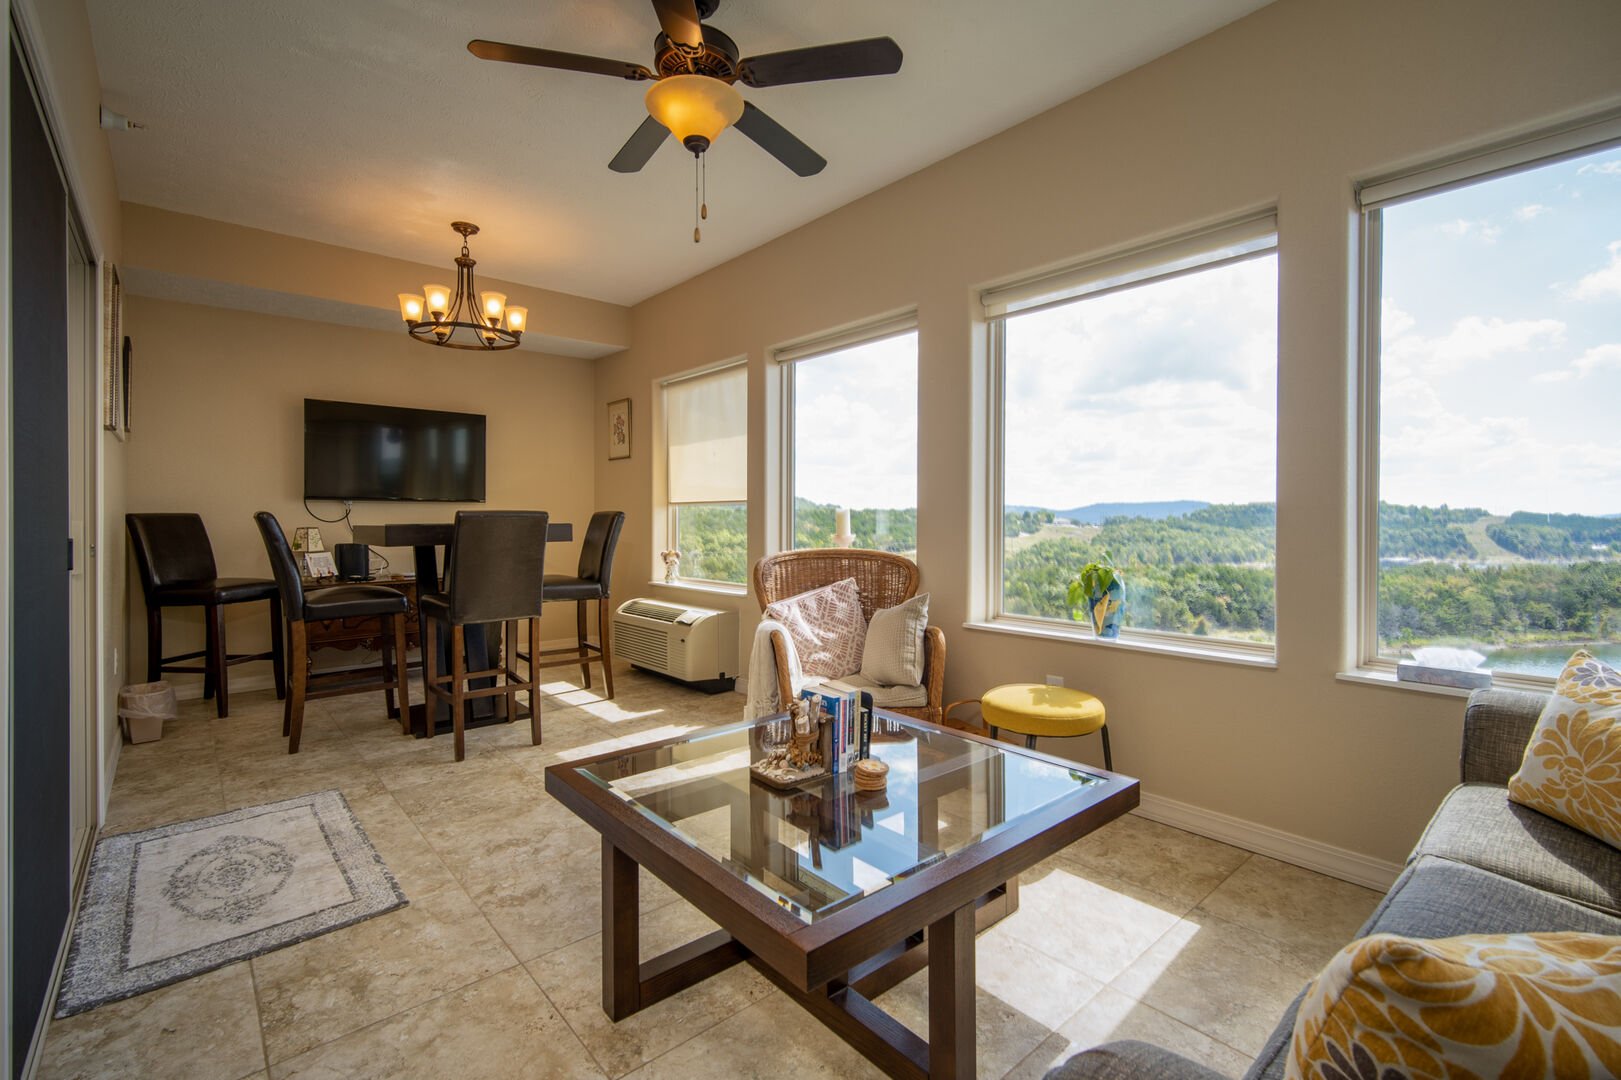 3 BD Majestic Lakeview Branson Condo - The View!